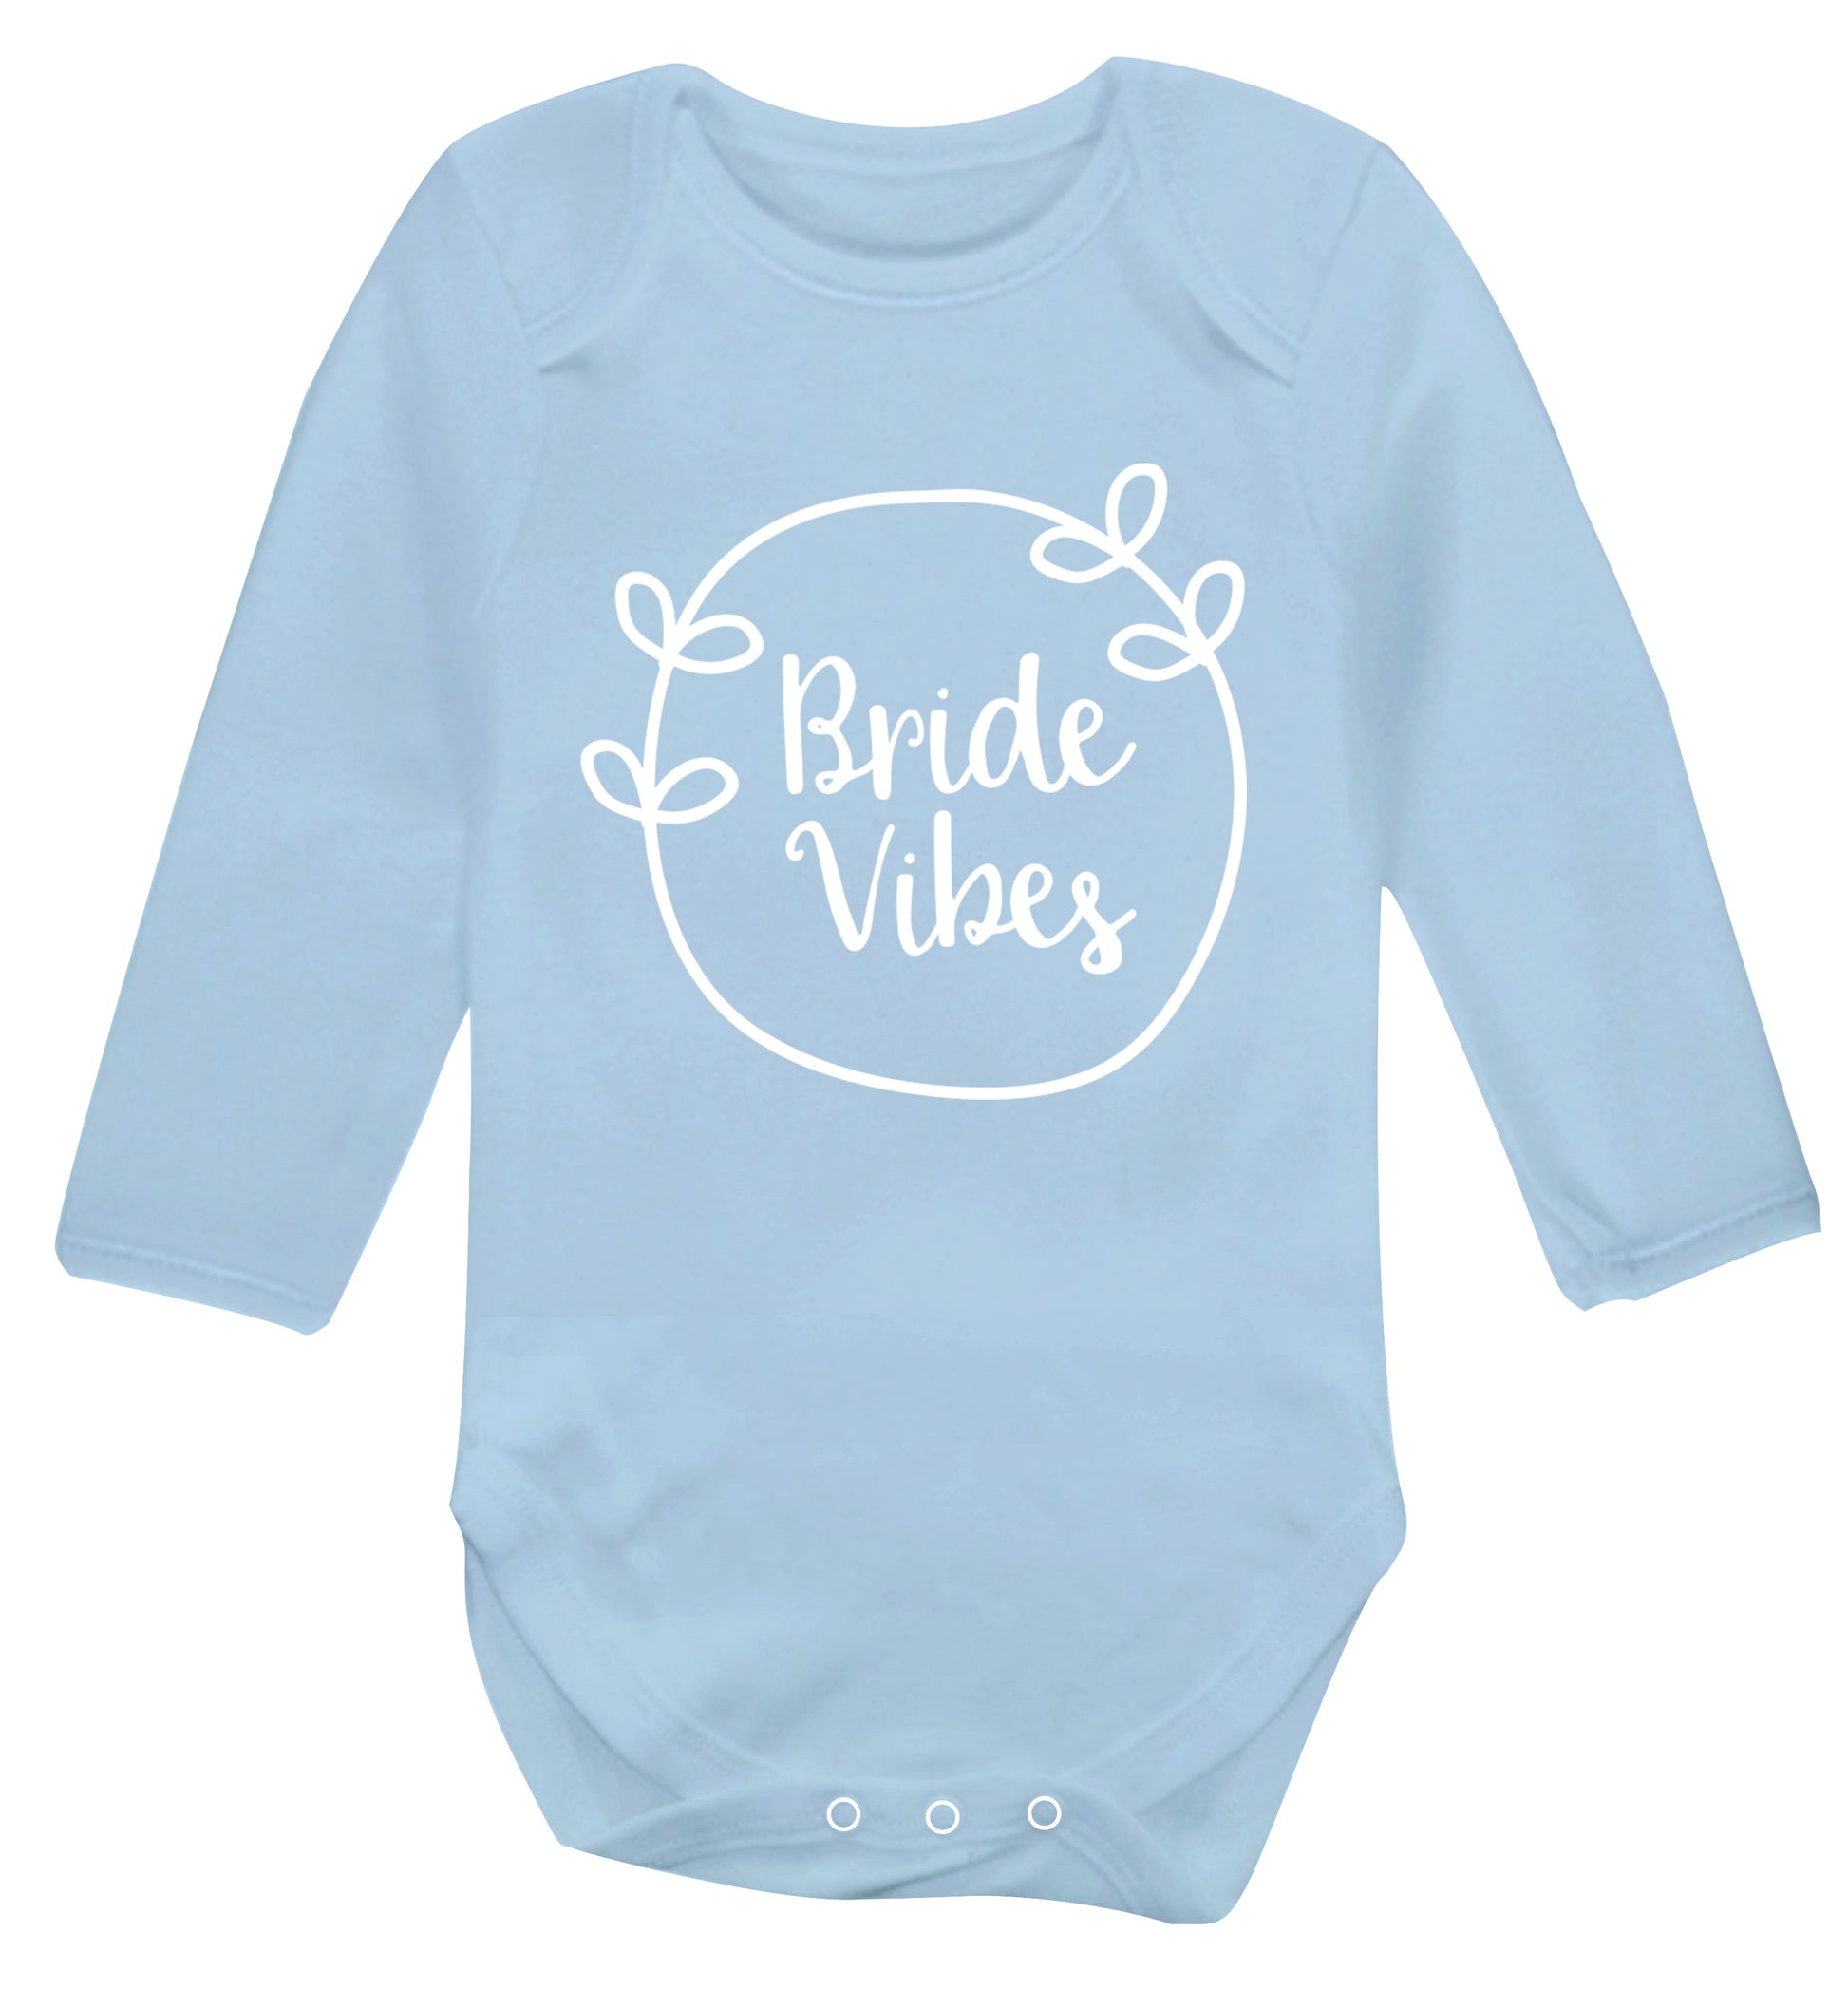 Bride Vibes Baby Vest long sleeved pale blue 6-12 months